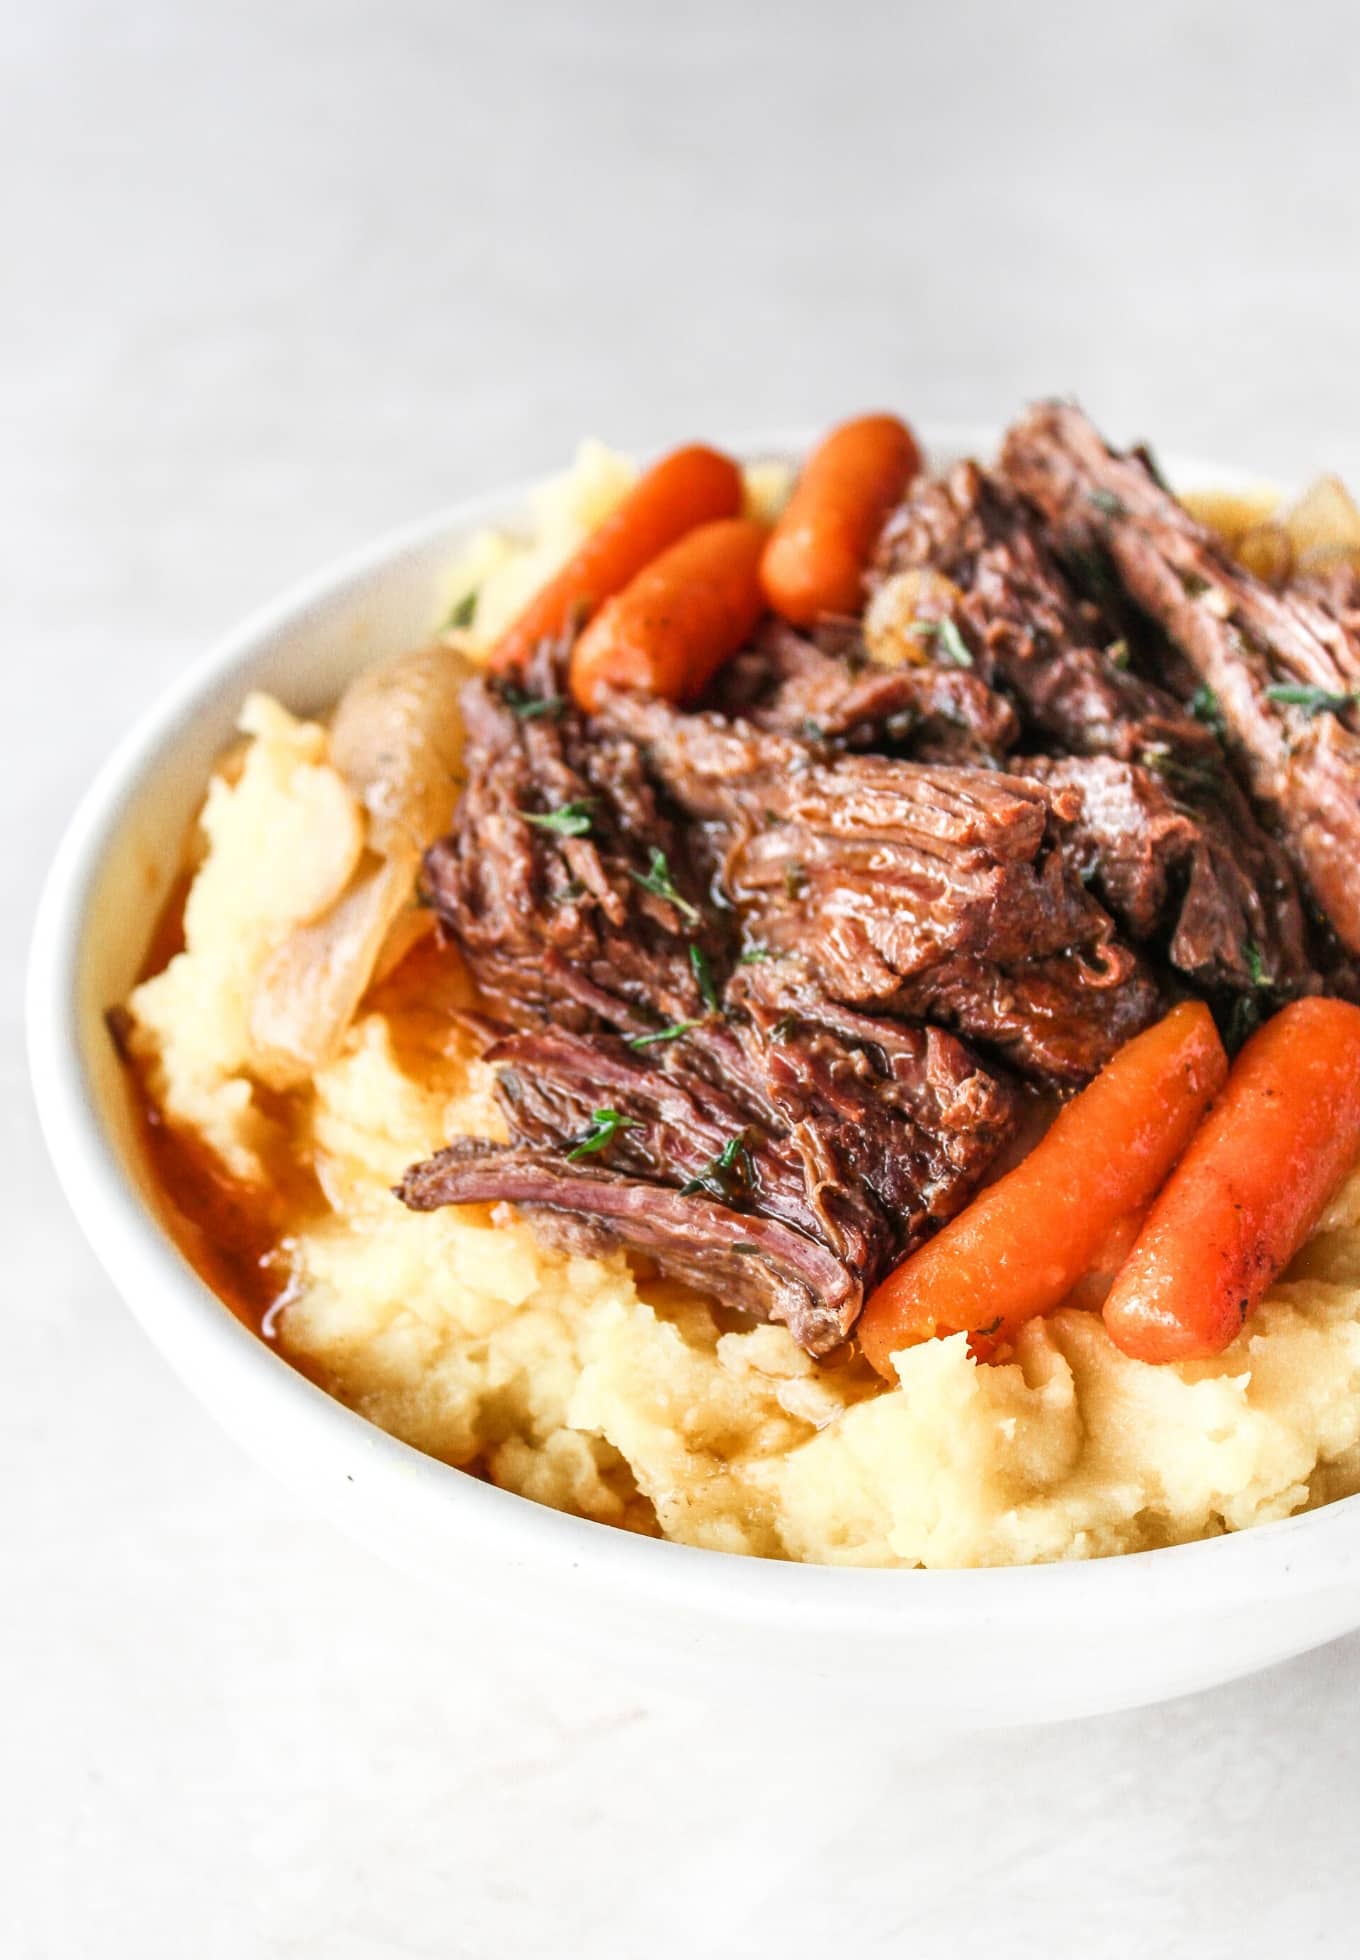 https://thewholecook.com/wp-content/uploads/2017/10/Garlic-Herb-Pot-Roast-by-The-Whole-Cook-vertical.jpg